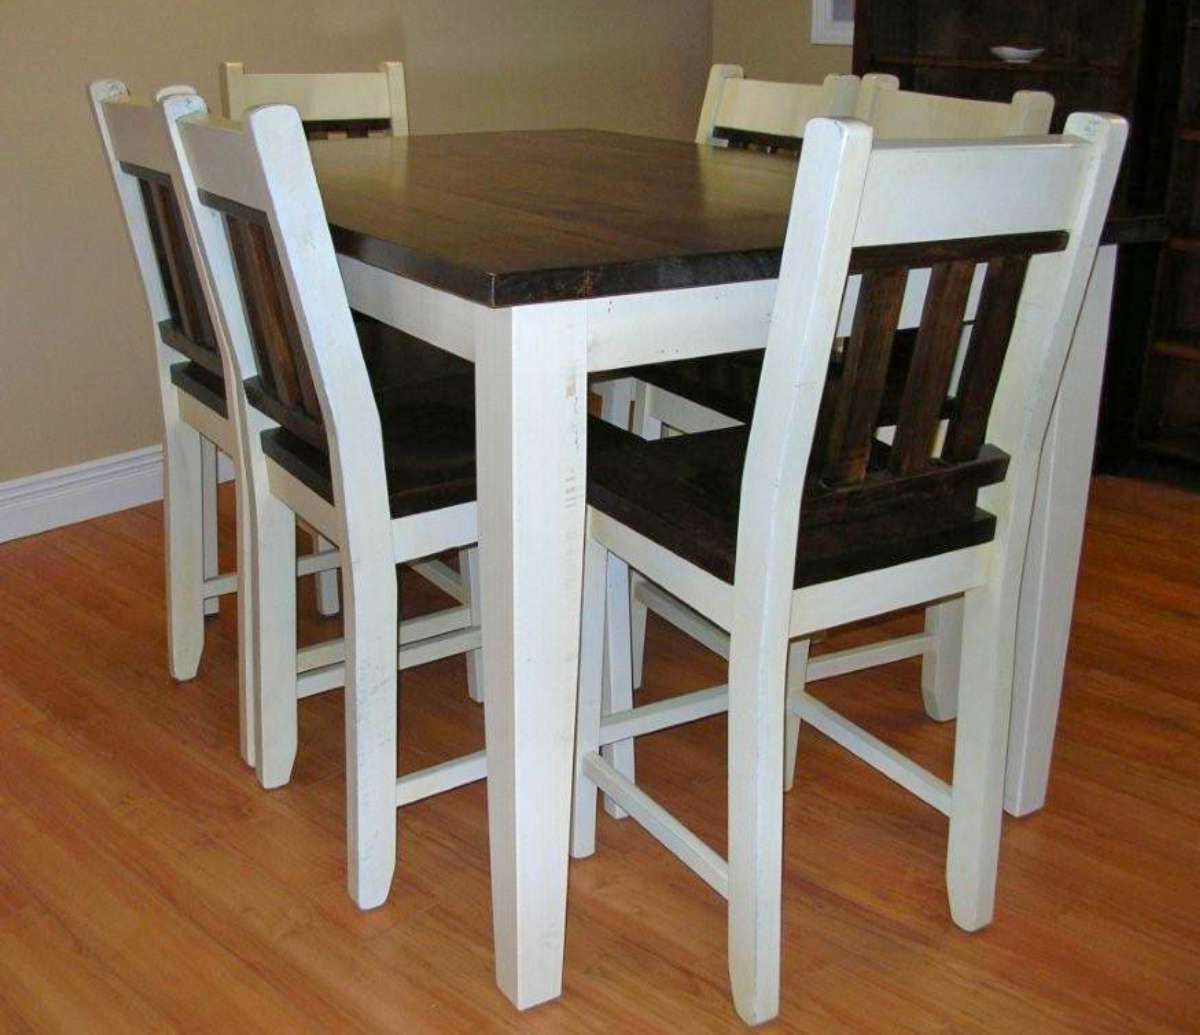 Drake Maple Solid Wood Dining Tables Intended For Popular Wormy Maple 7 Piece Bistro Table Set – Solid Wood (View 6 of 20)